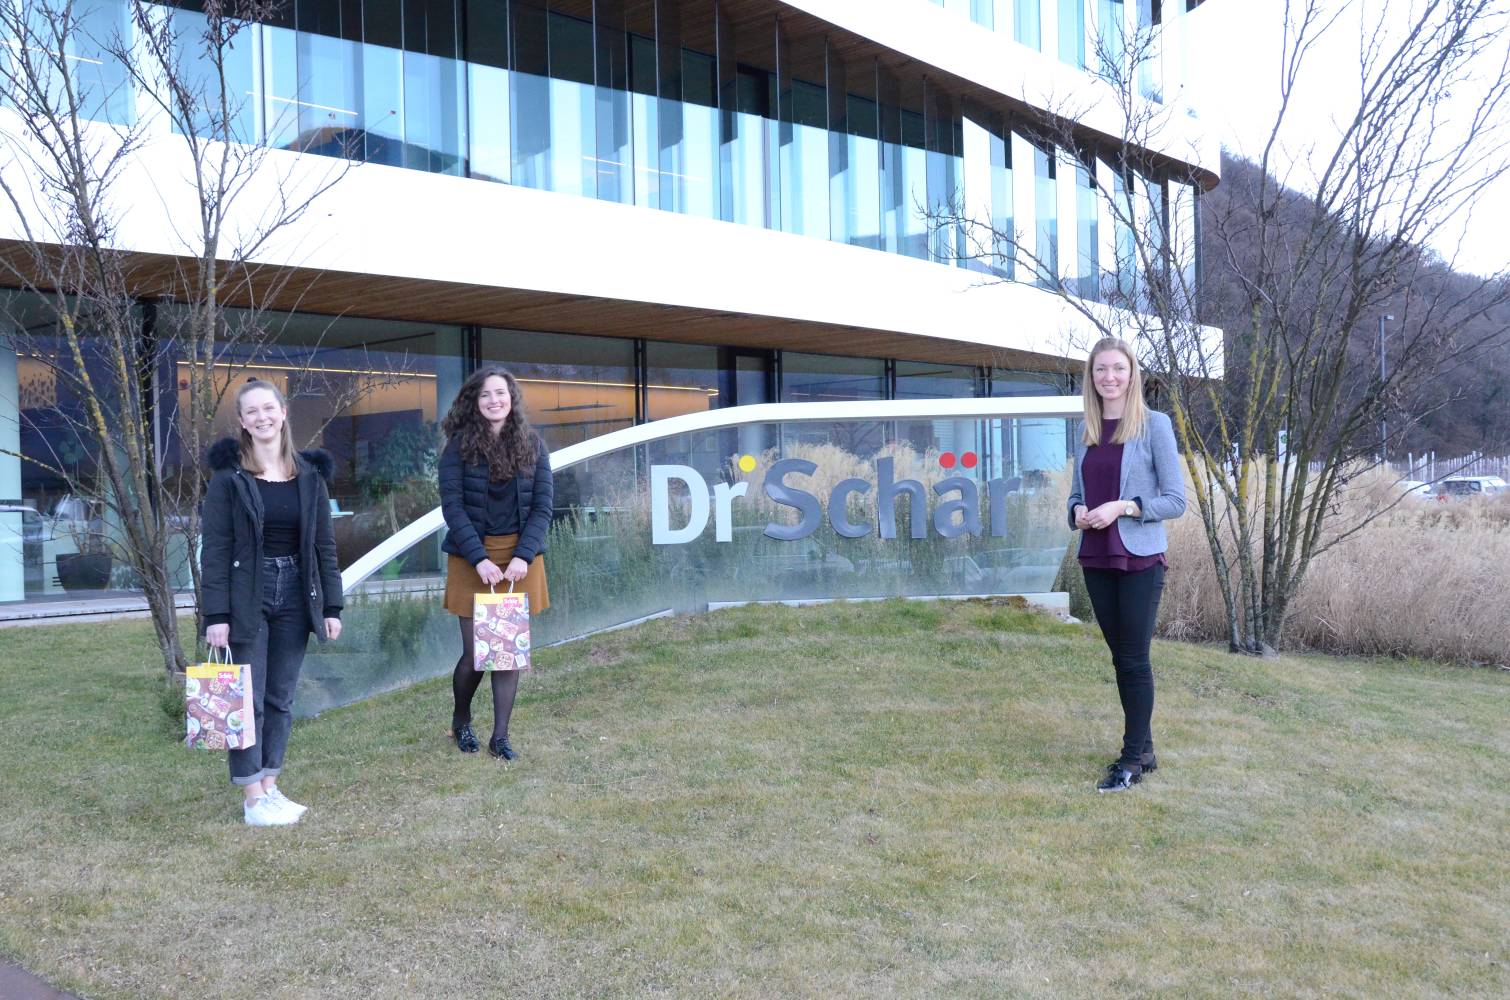 From left to right: Katherina Telser, MCI student, Lisa Bertolini, MCI student and Valentina Thurner, Corporate HR Marketing Expert at Dr. Schär. ©Dr. Schä